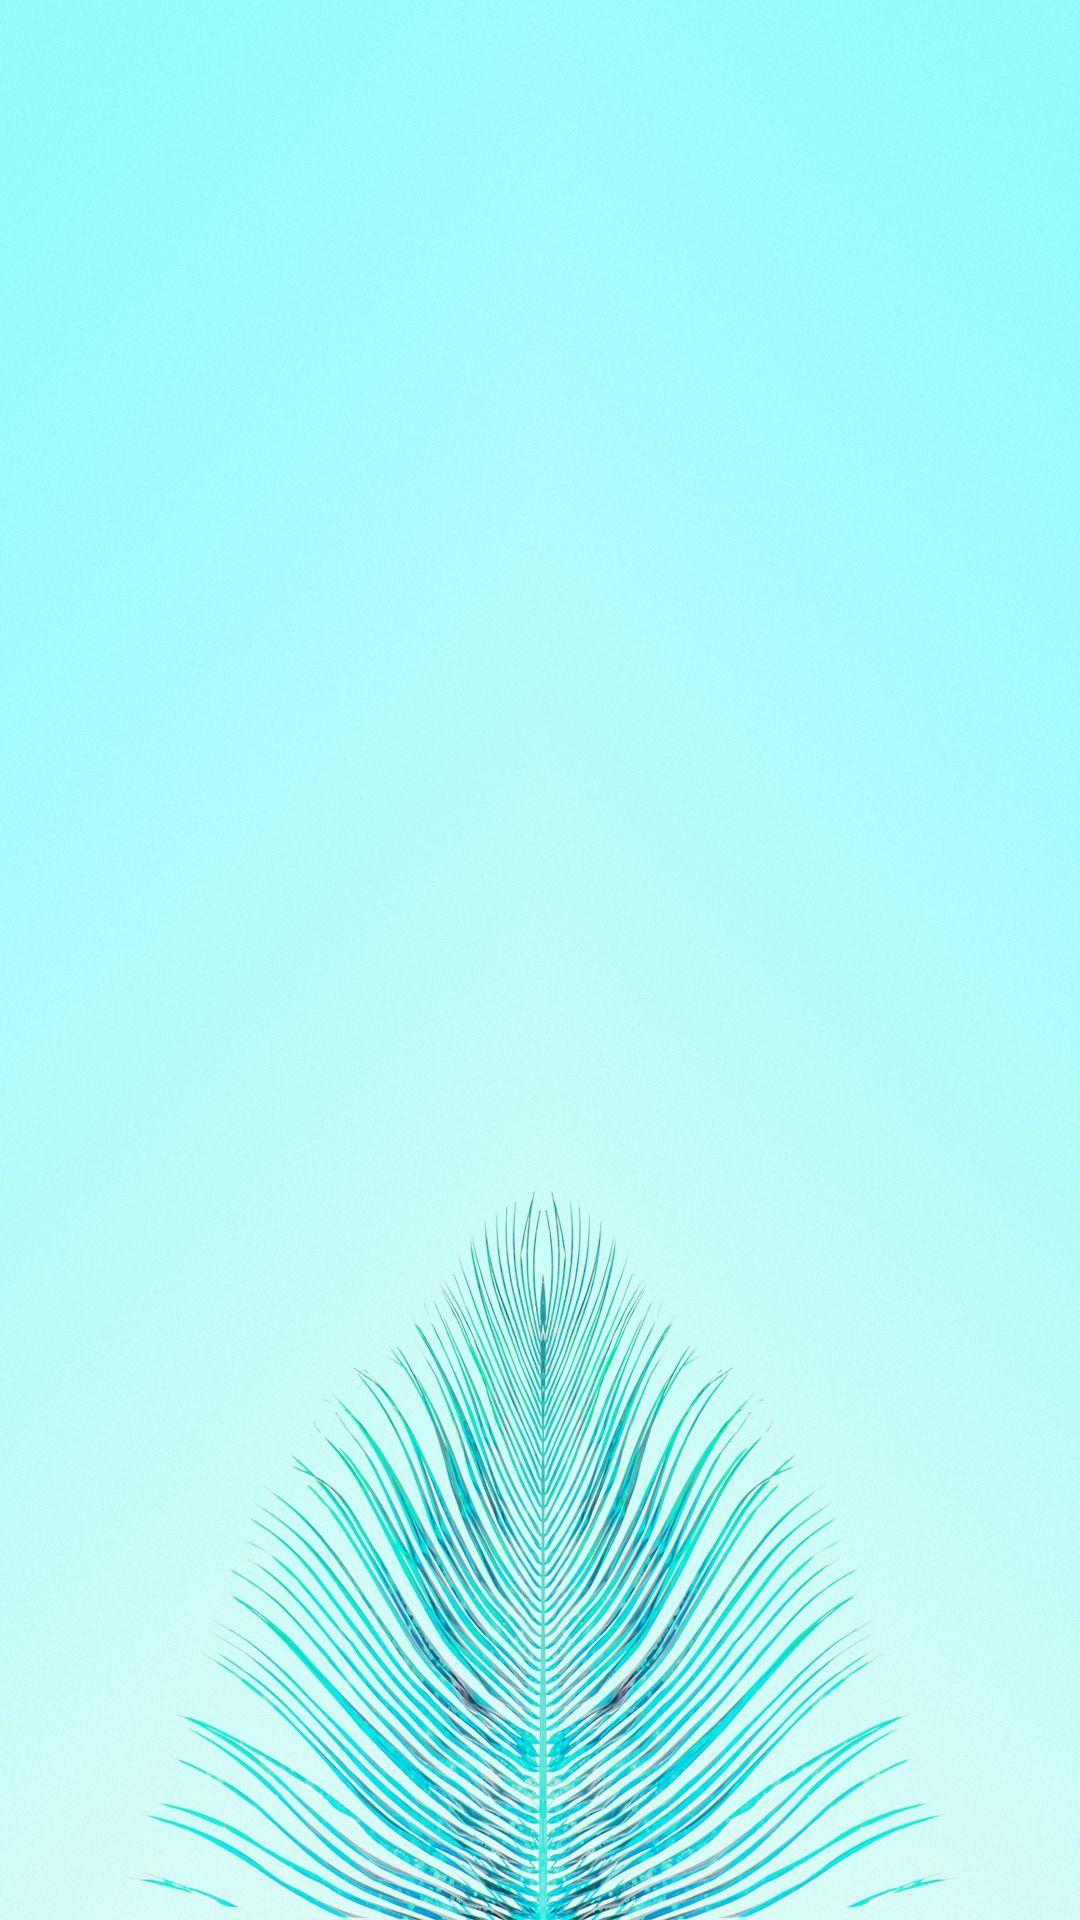 Turquoise blue bright wallpaper design - Stock Image - Everypixel